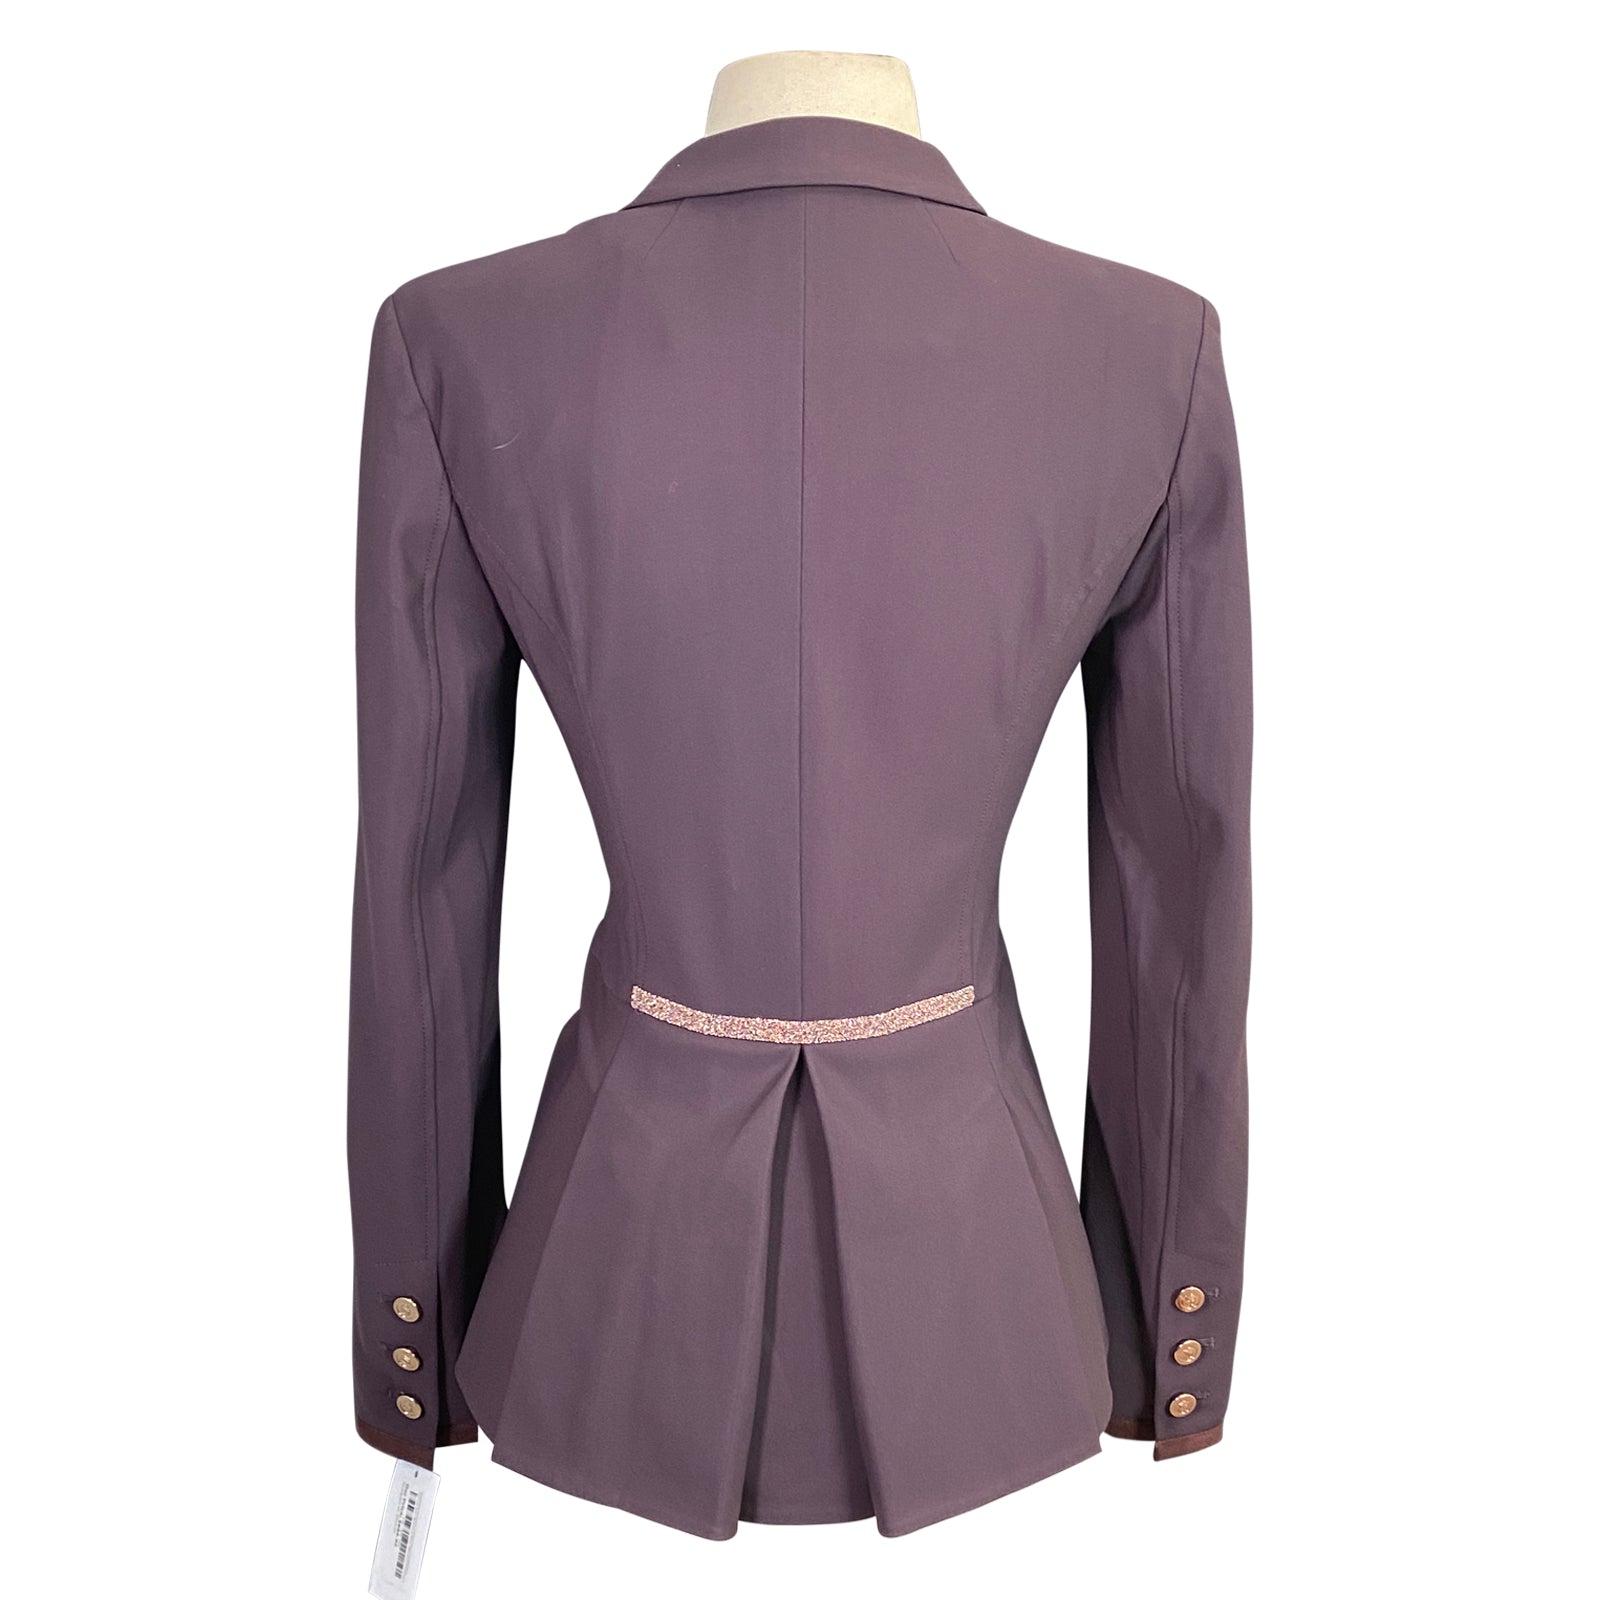 Back of Samshield 'Victorine' Crystal Fabric Competition Jacket in Aubergine/Rose Gold